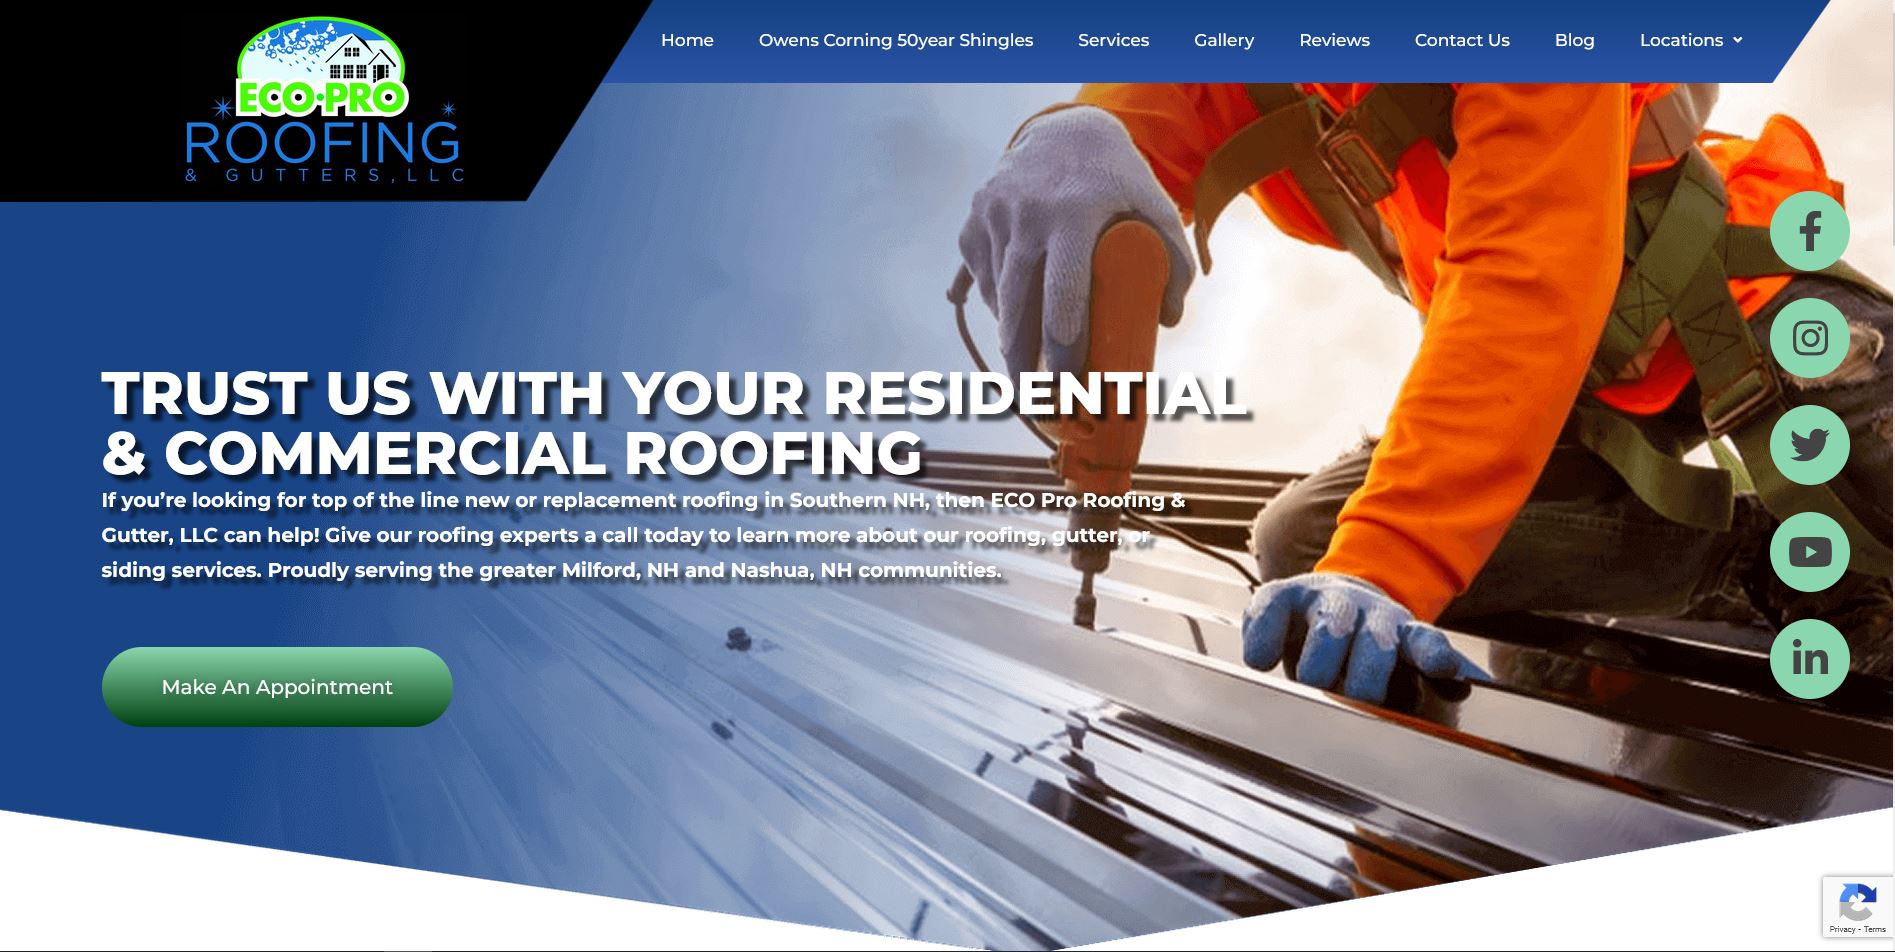 The Leading Contractor for Commercial & Residential Roofing Bedford NH